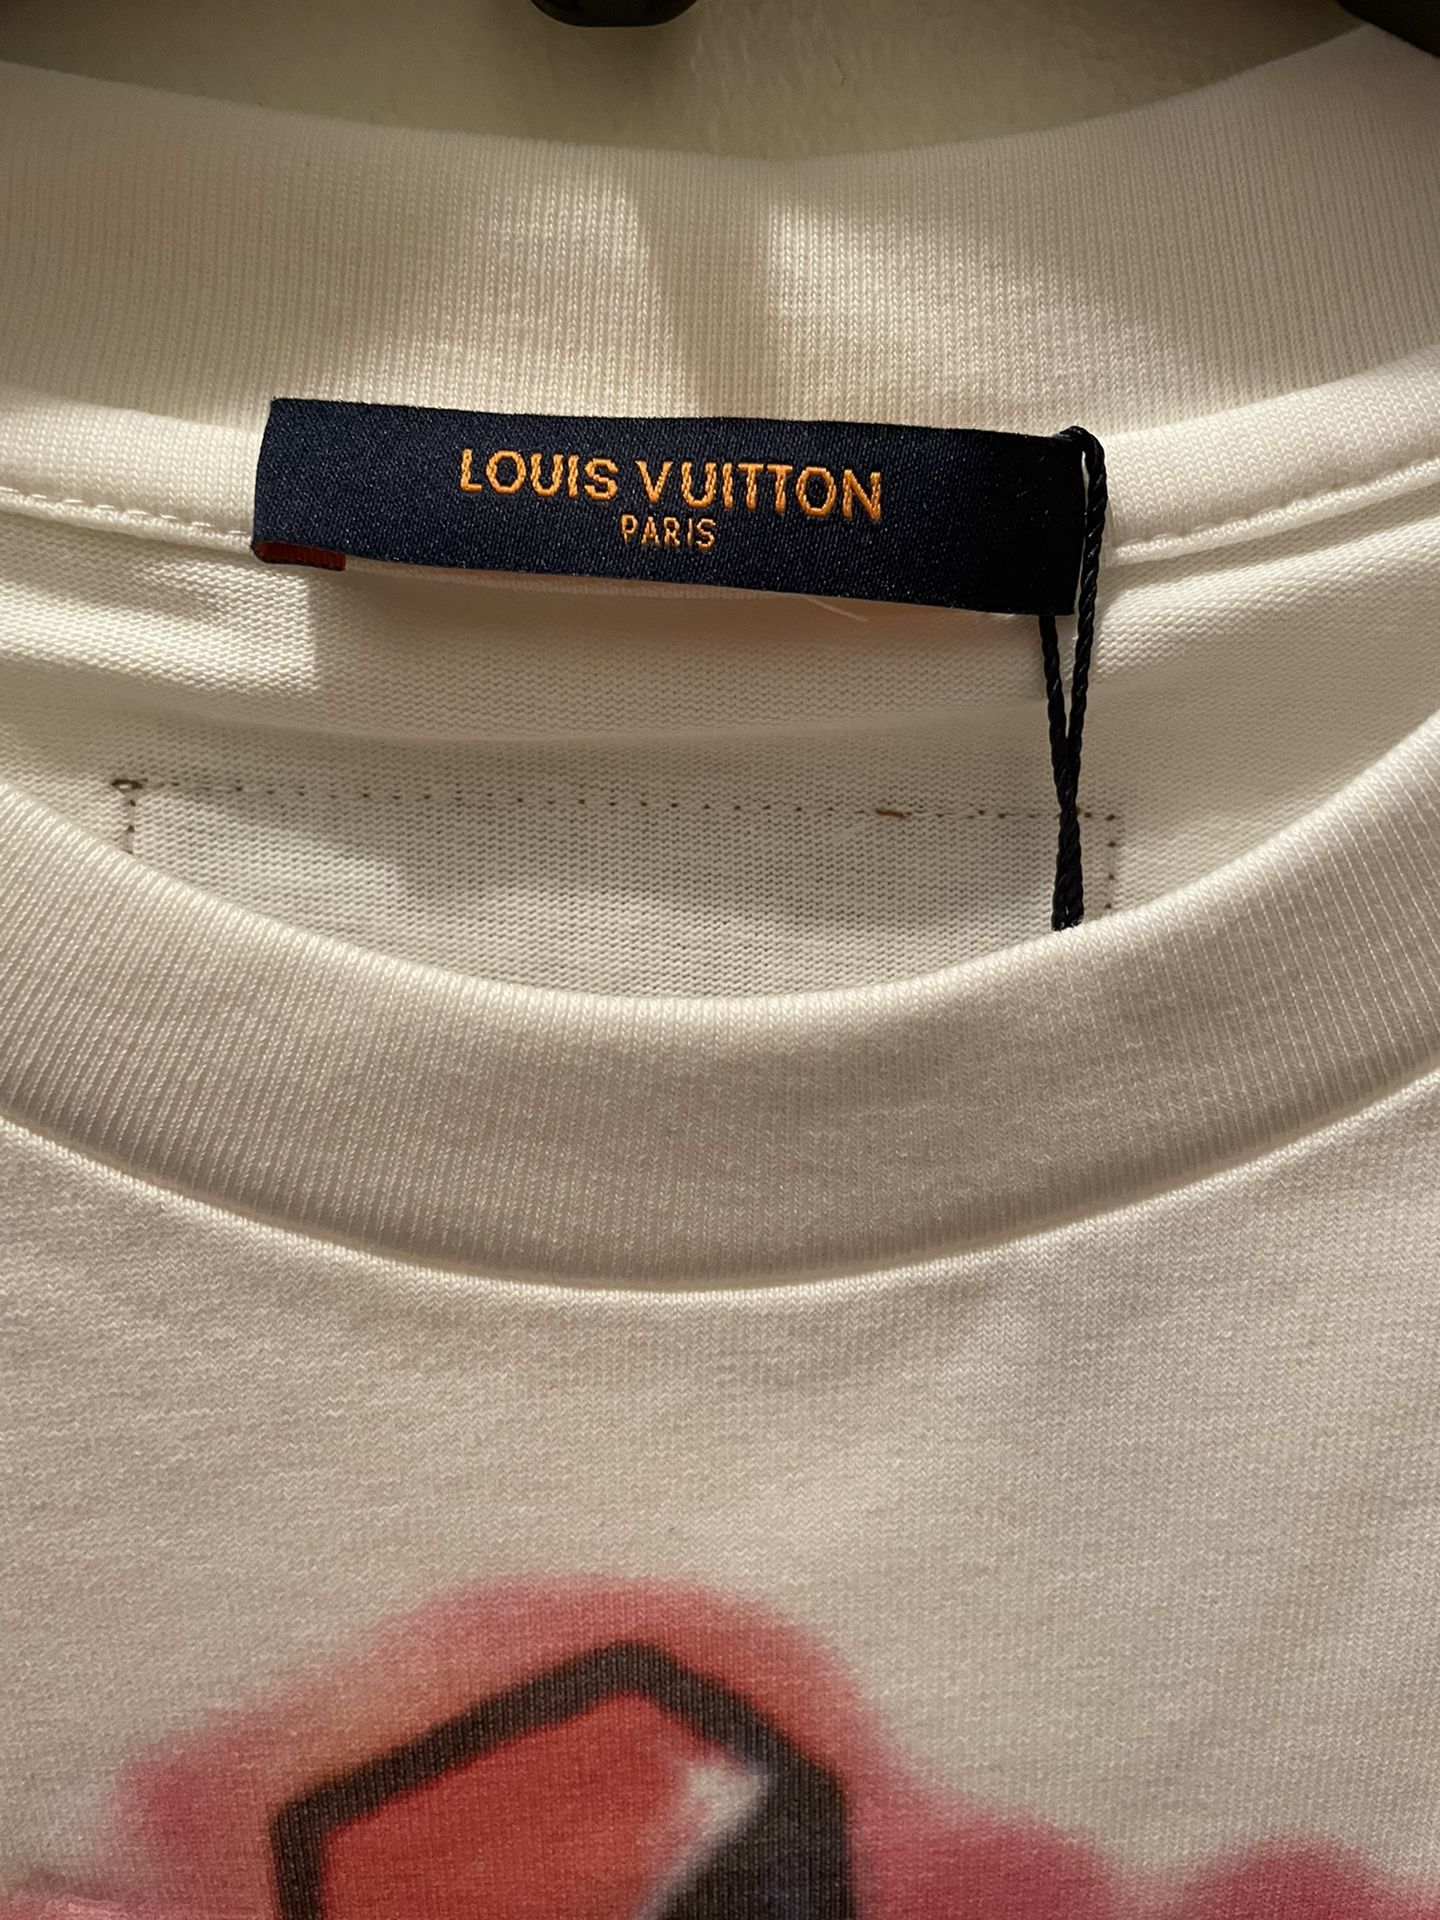 Louis Vuitton White Shirt Medium for Sale in Queens, NY - OfferUp